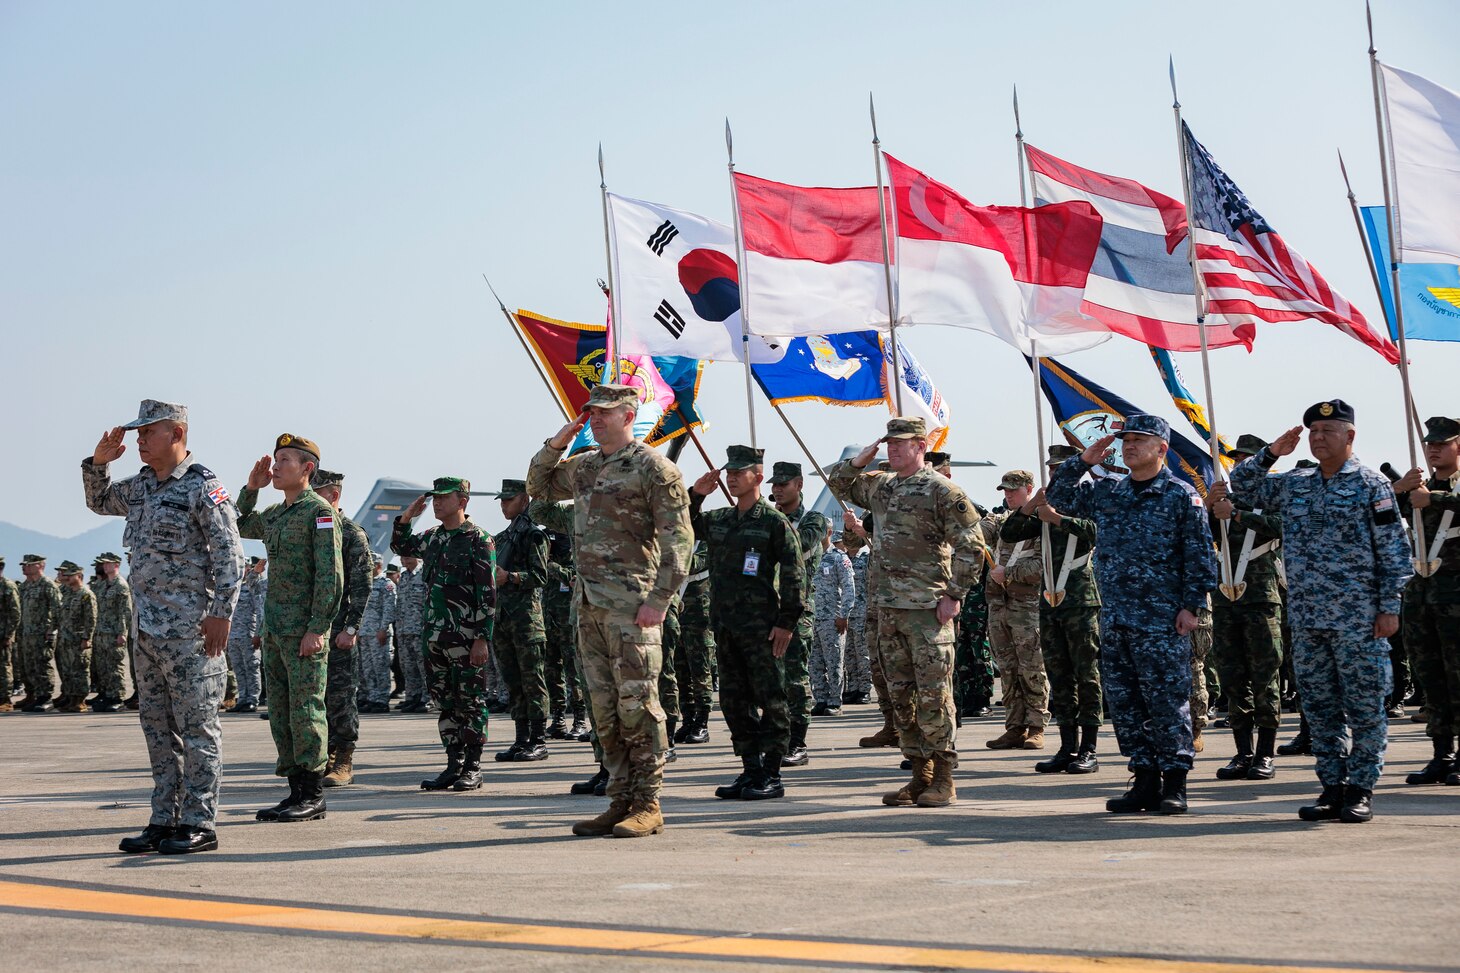 Service members from participating nations attend the opening ceremony of Exercise Cobra Gold at Utapao International Airport, Ban Chang district, Rayong province, Kingdom of Thailand, Feb. 28, 2023. Cobra Gold, now in its 42nd year, is a Thai-U.S. co-sponsored training event that builds on the longstanding friendship between the two allied nations and brings together a robust multinational force to promote regional peace and security in support of a free and open Indo-Pacific. (U.S. Army National Guard photo by Staff Sgt. Adeline Witherspoon)